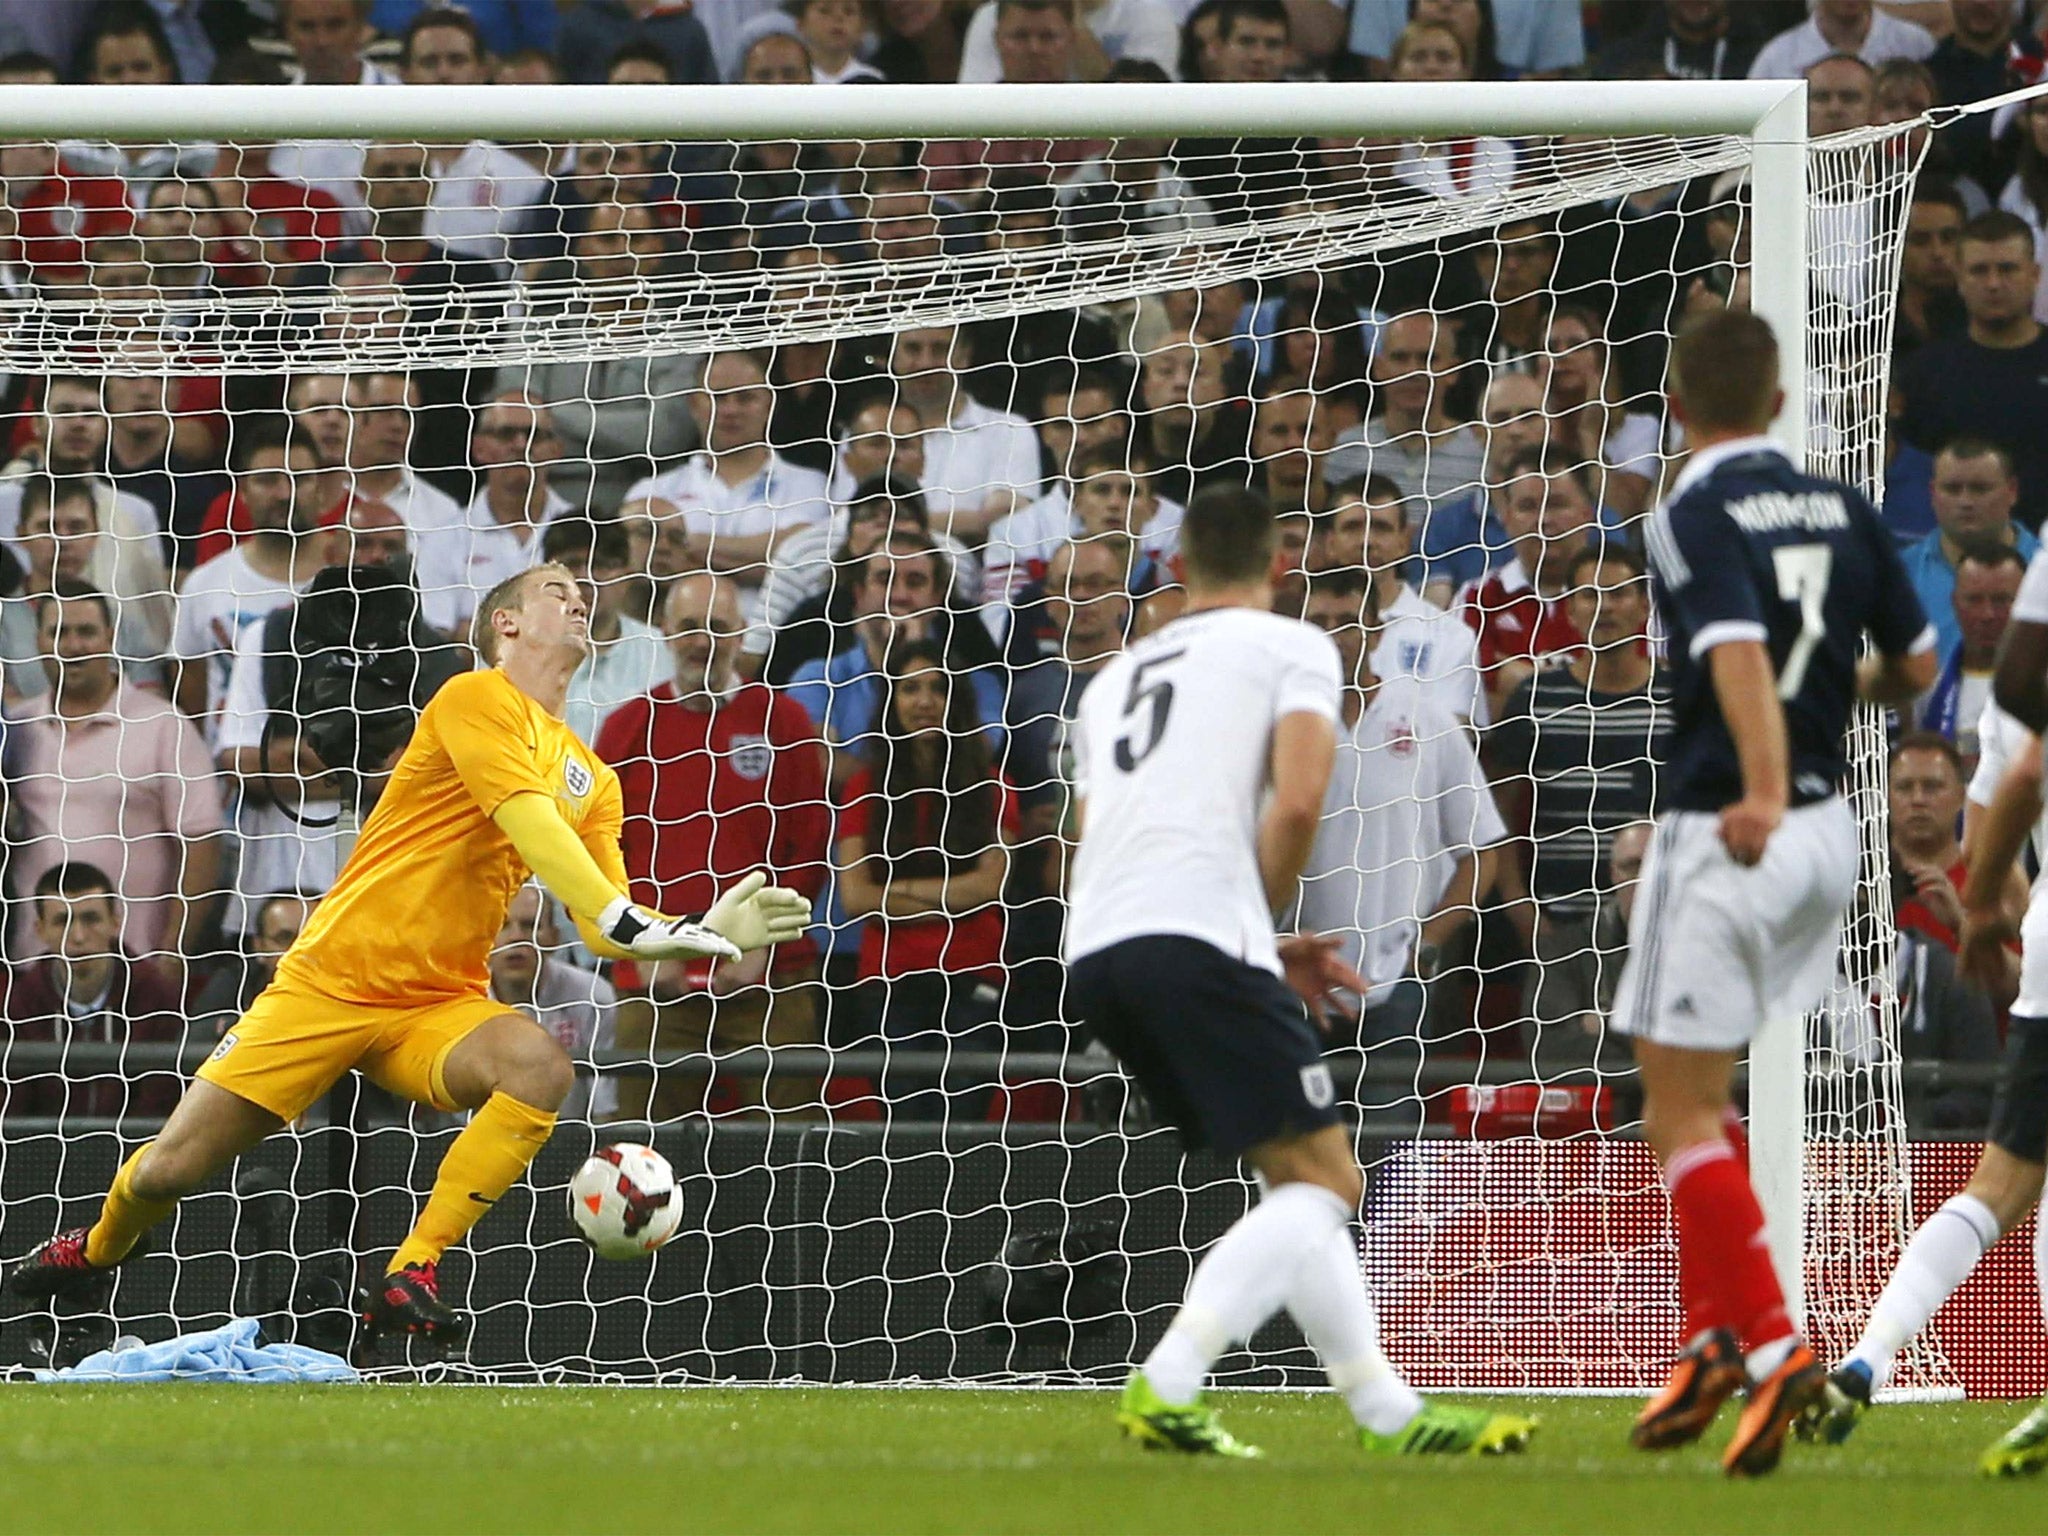 Joe Hart is at fault as he fails to save the shot from James Morrison (right) which brought Scotland’s first goal